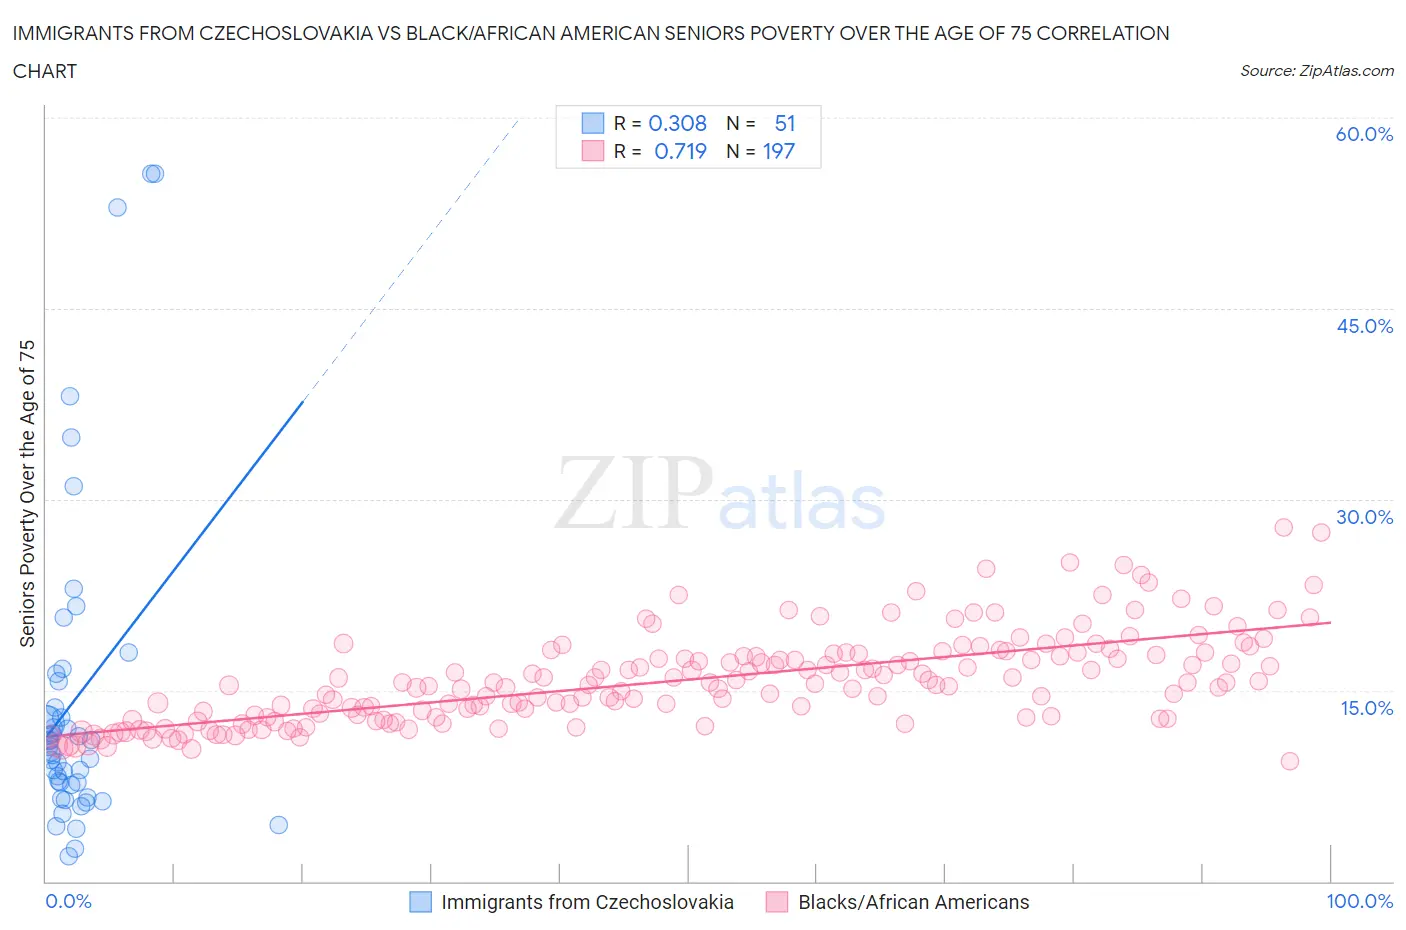 Immigrants from Czechoslovakia vs Black/African American Seniors Poverty Over the Age of 75